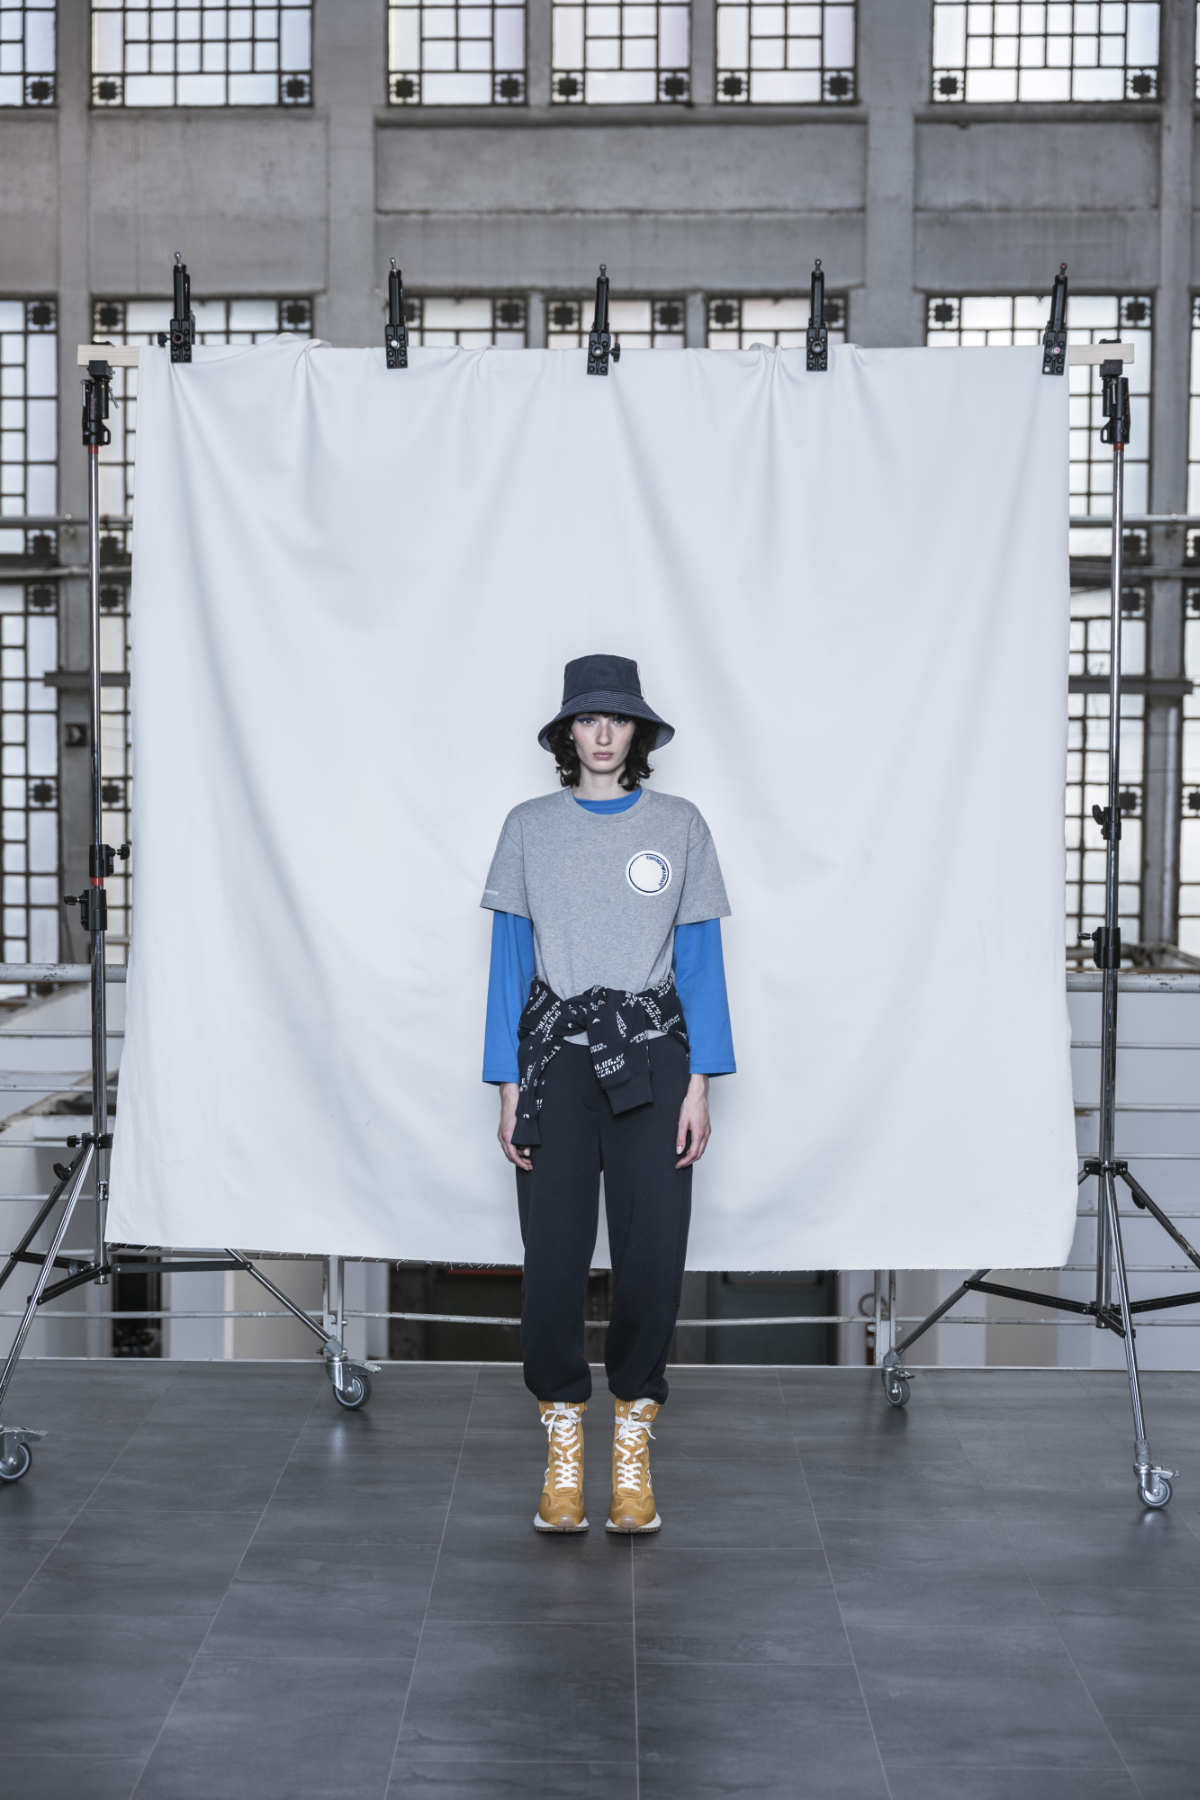 Emporio Armani Presents Its New Autumn/Winter 2023/24 Sustainable Collection